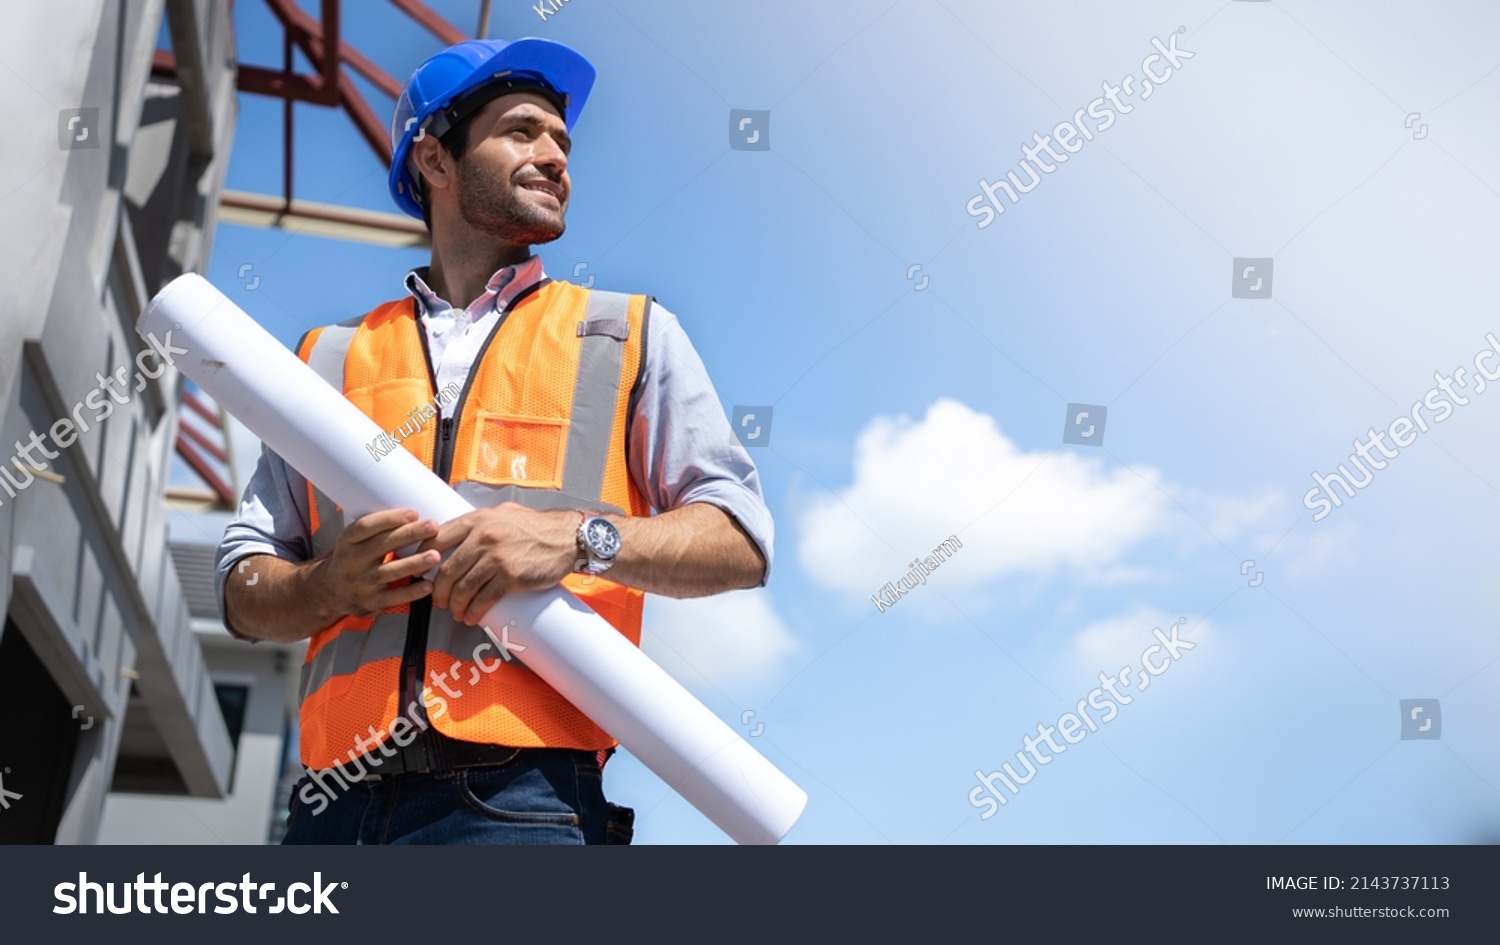 Civil Engineer Hispanic smiling with Constuction backgrounds, use for banner cover. Success in target of project goal Handsome Middle Eastern worker. #2143737113